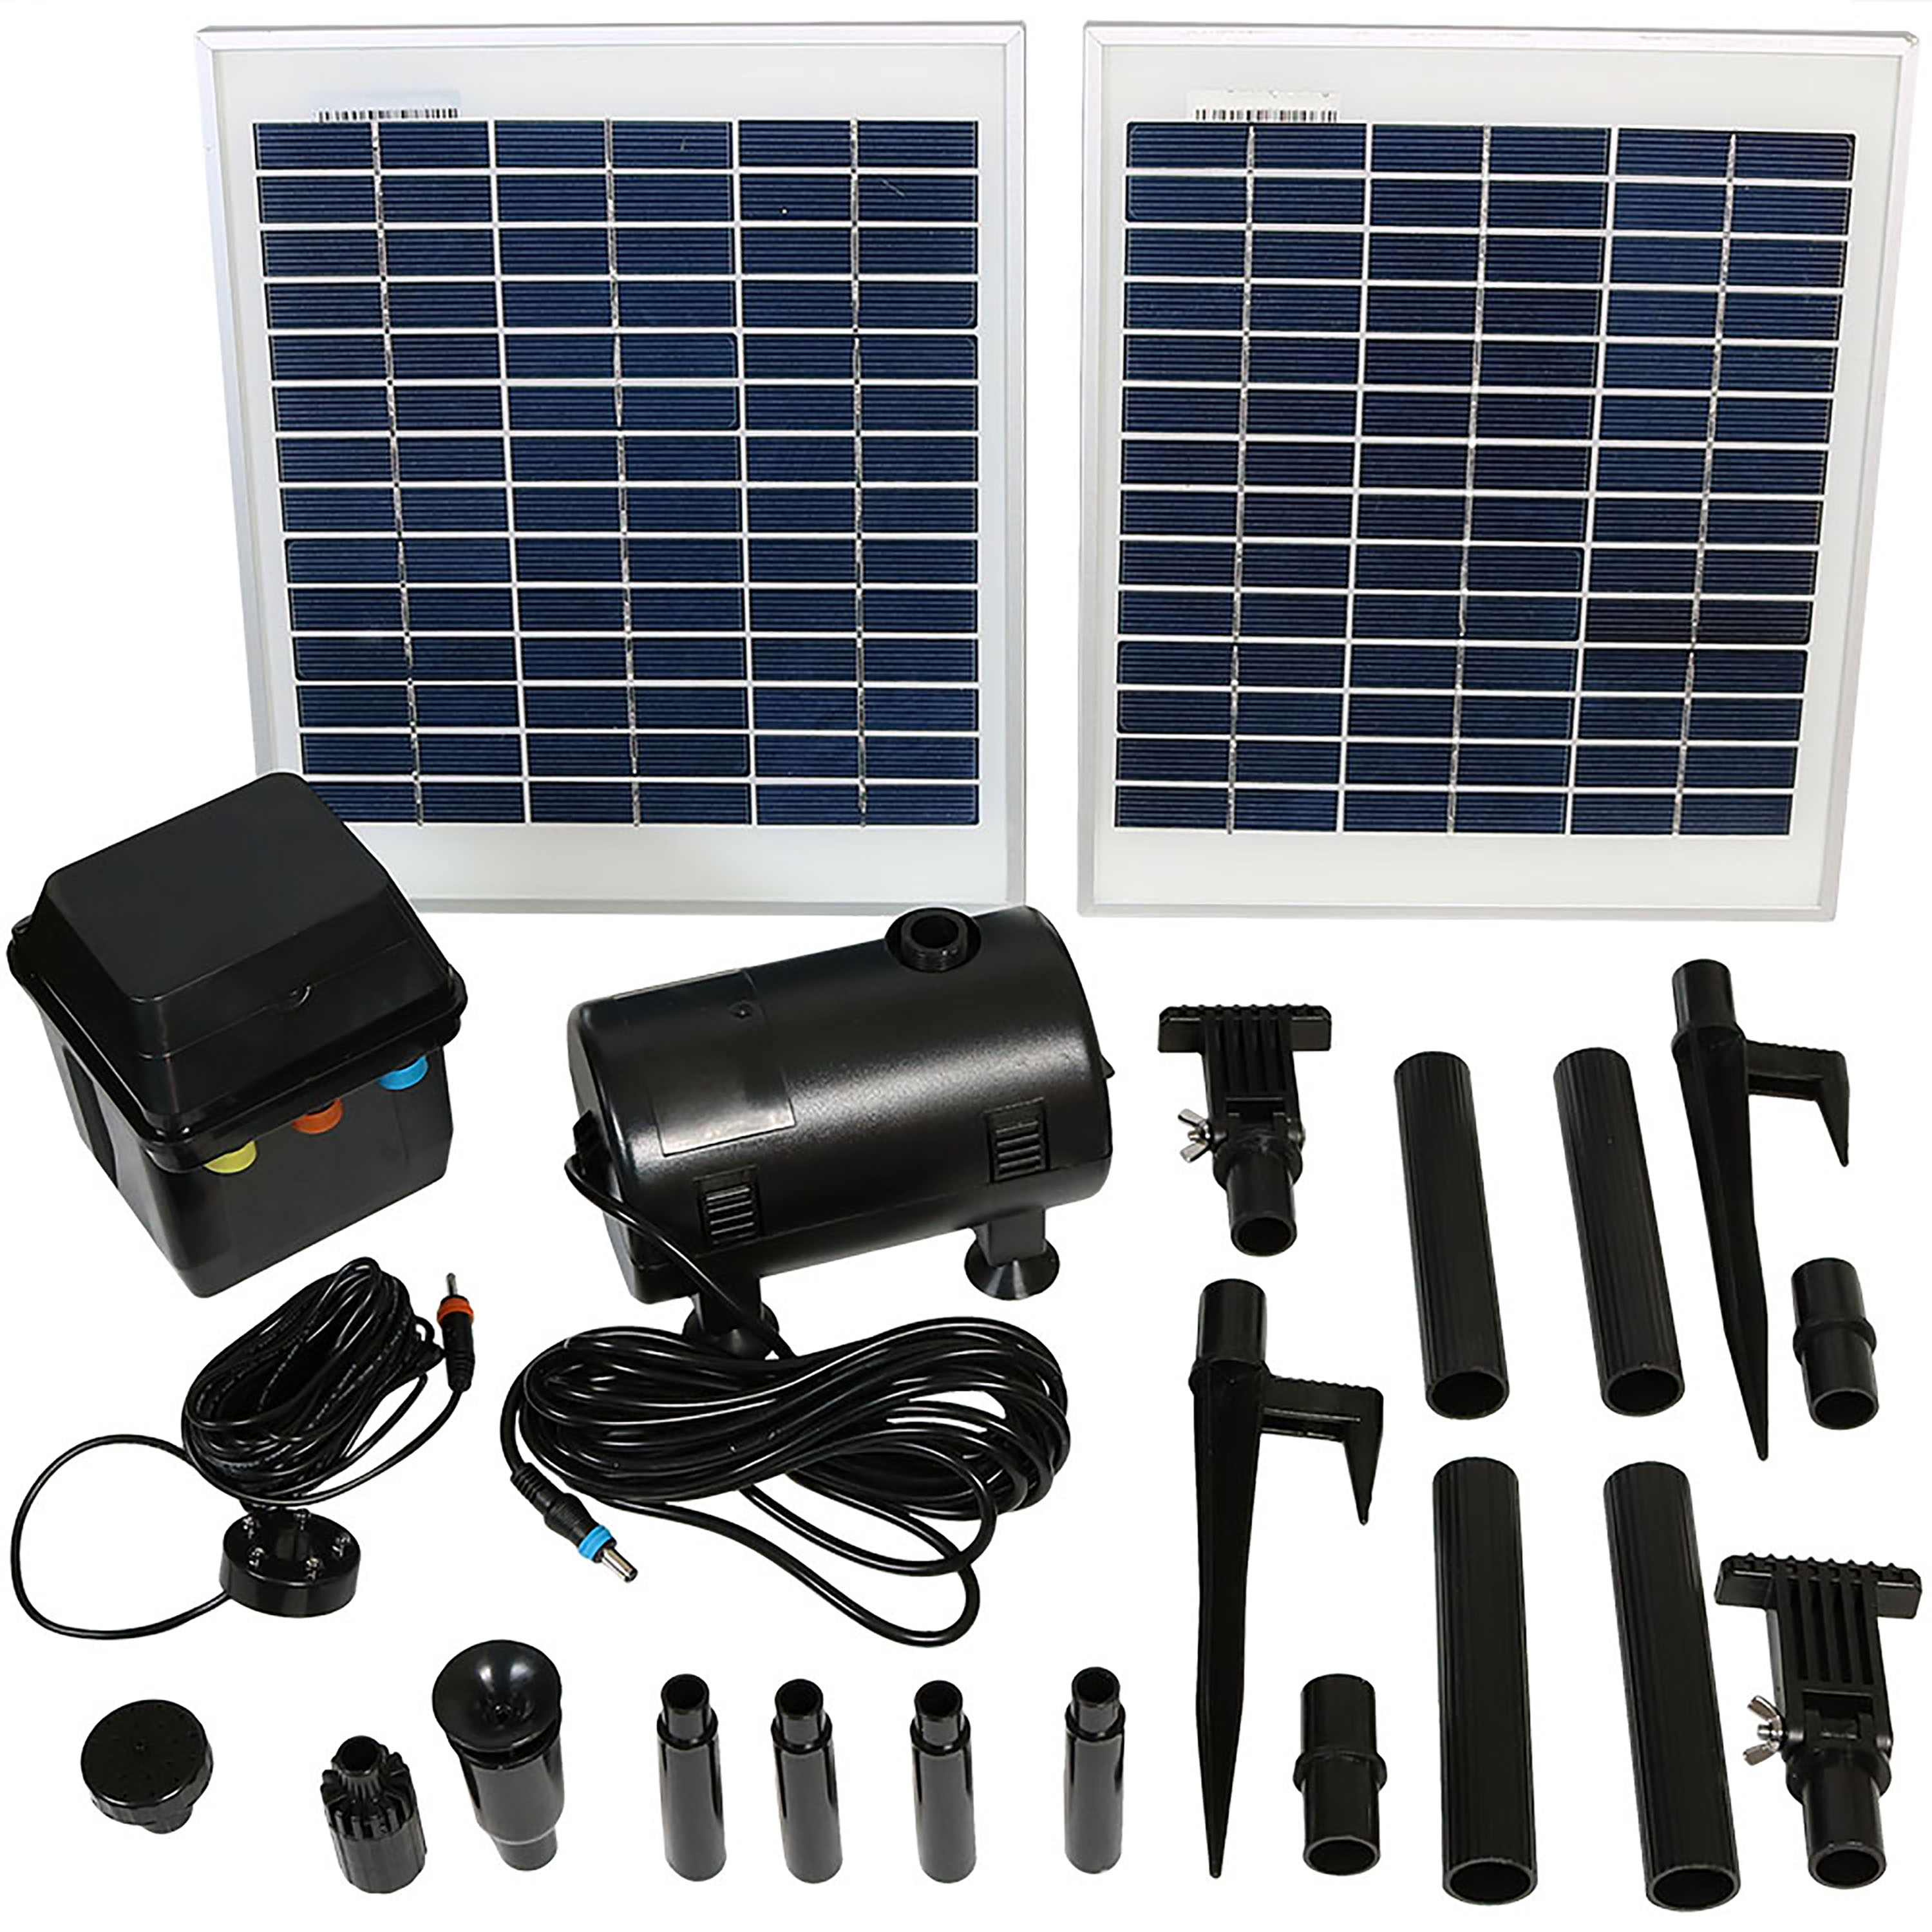 396 GPH Solar Pump and Panel Kit with Battery and Light